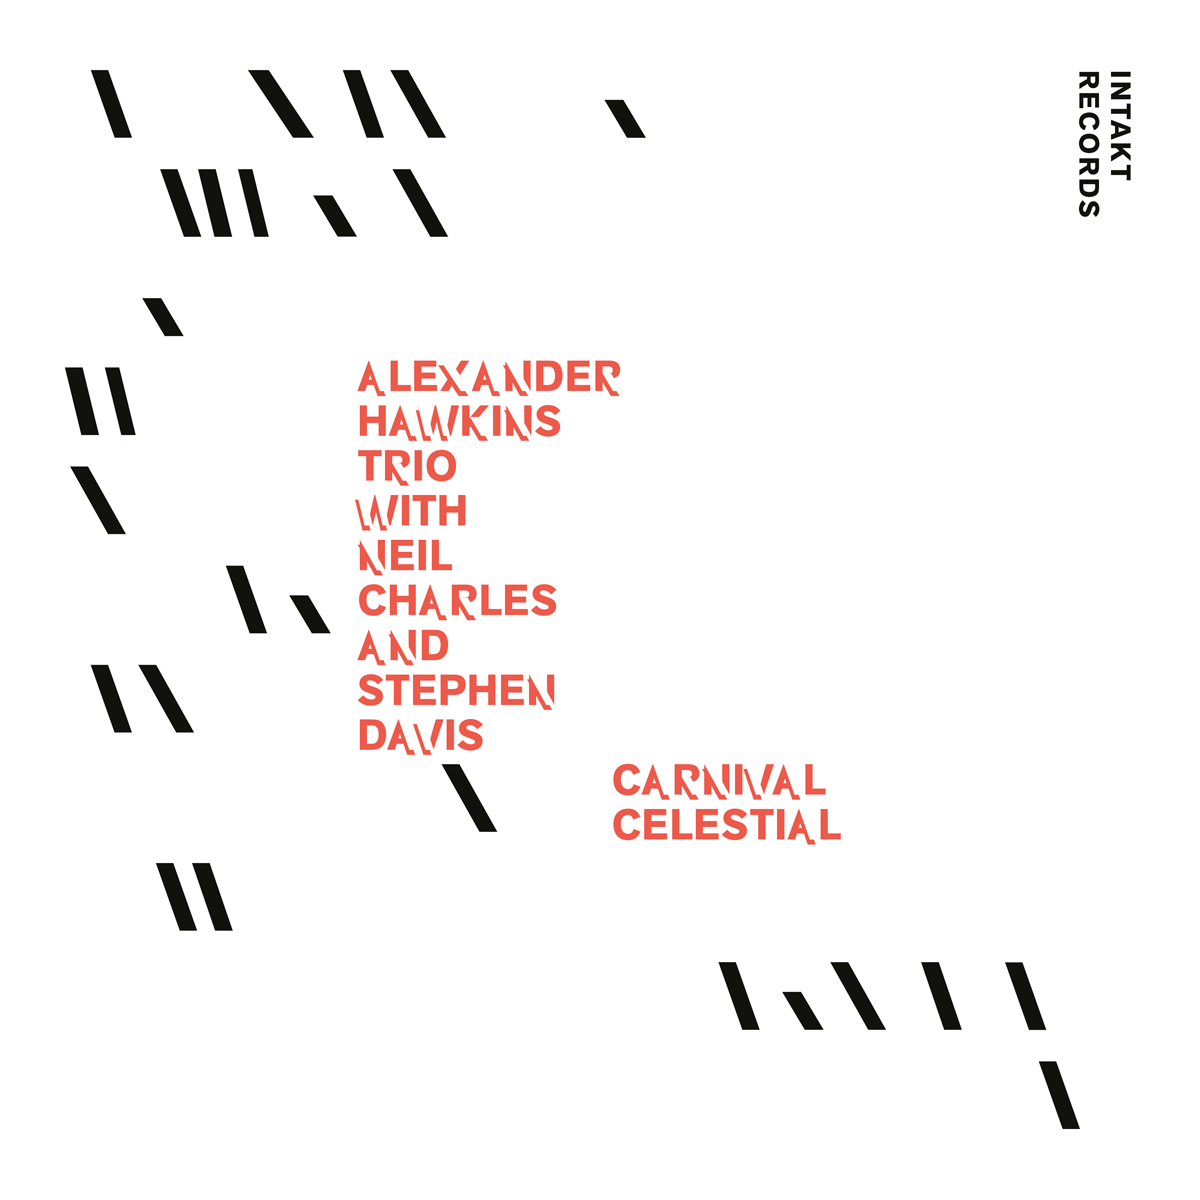 ALEXANDER HAWKINS TRIO
WITH NEIL CHARLES AND STEPHEN DAVIS
CARNIVAL CELESTIAL
cover front intakt records